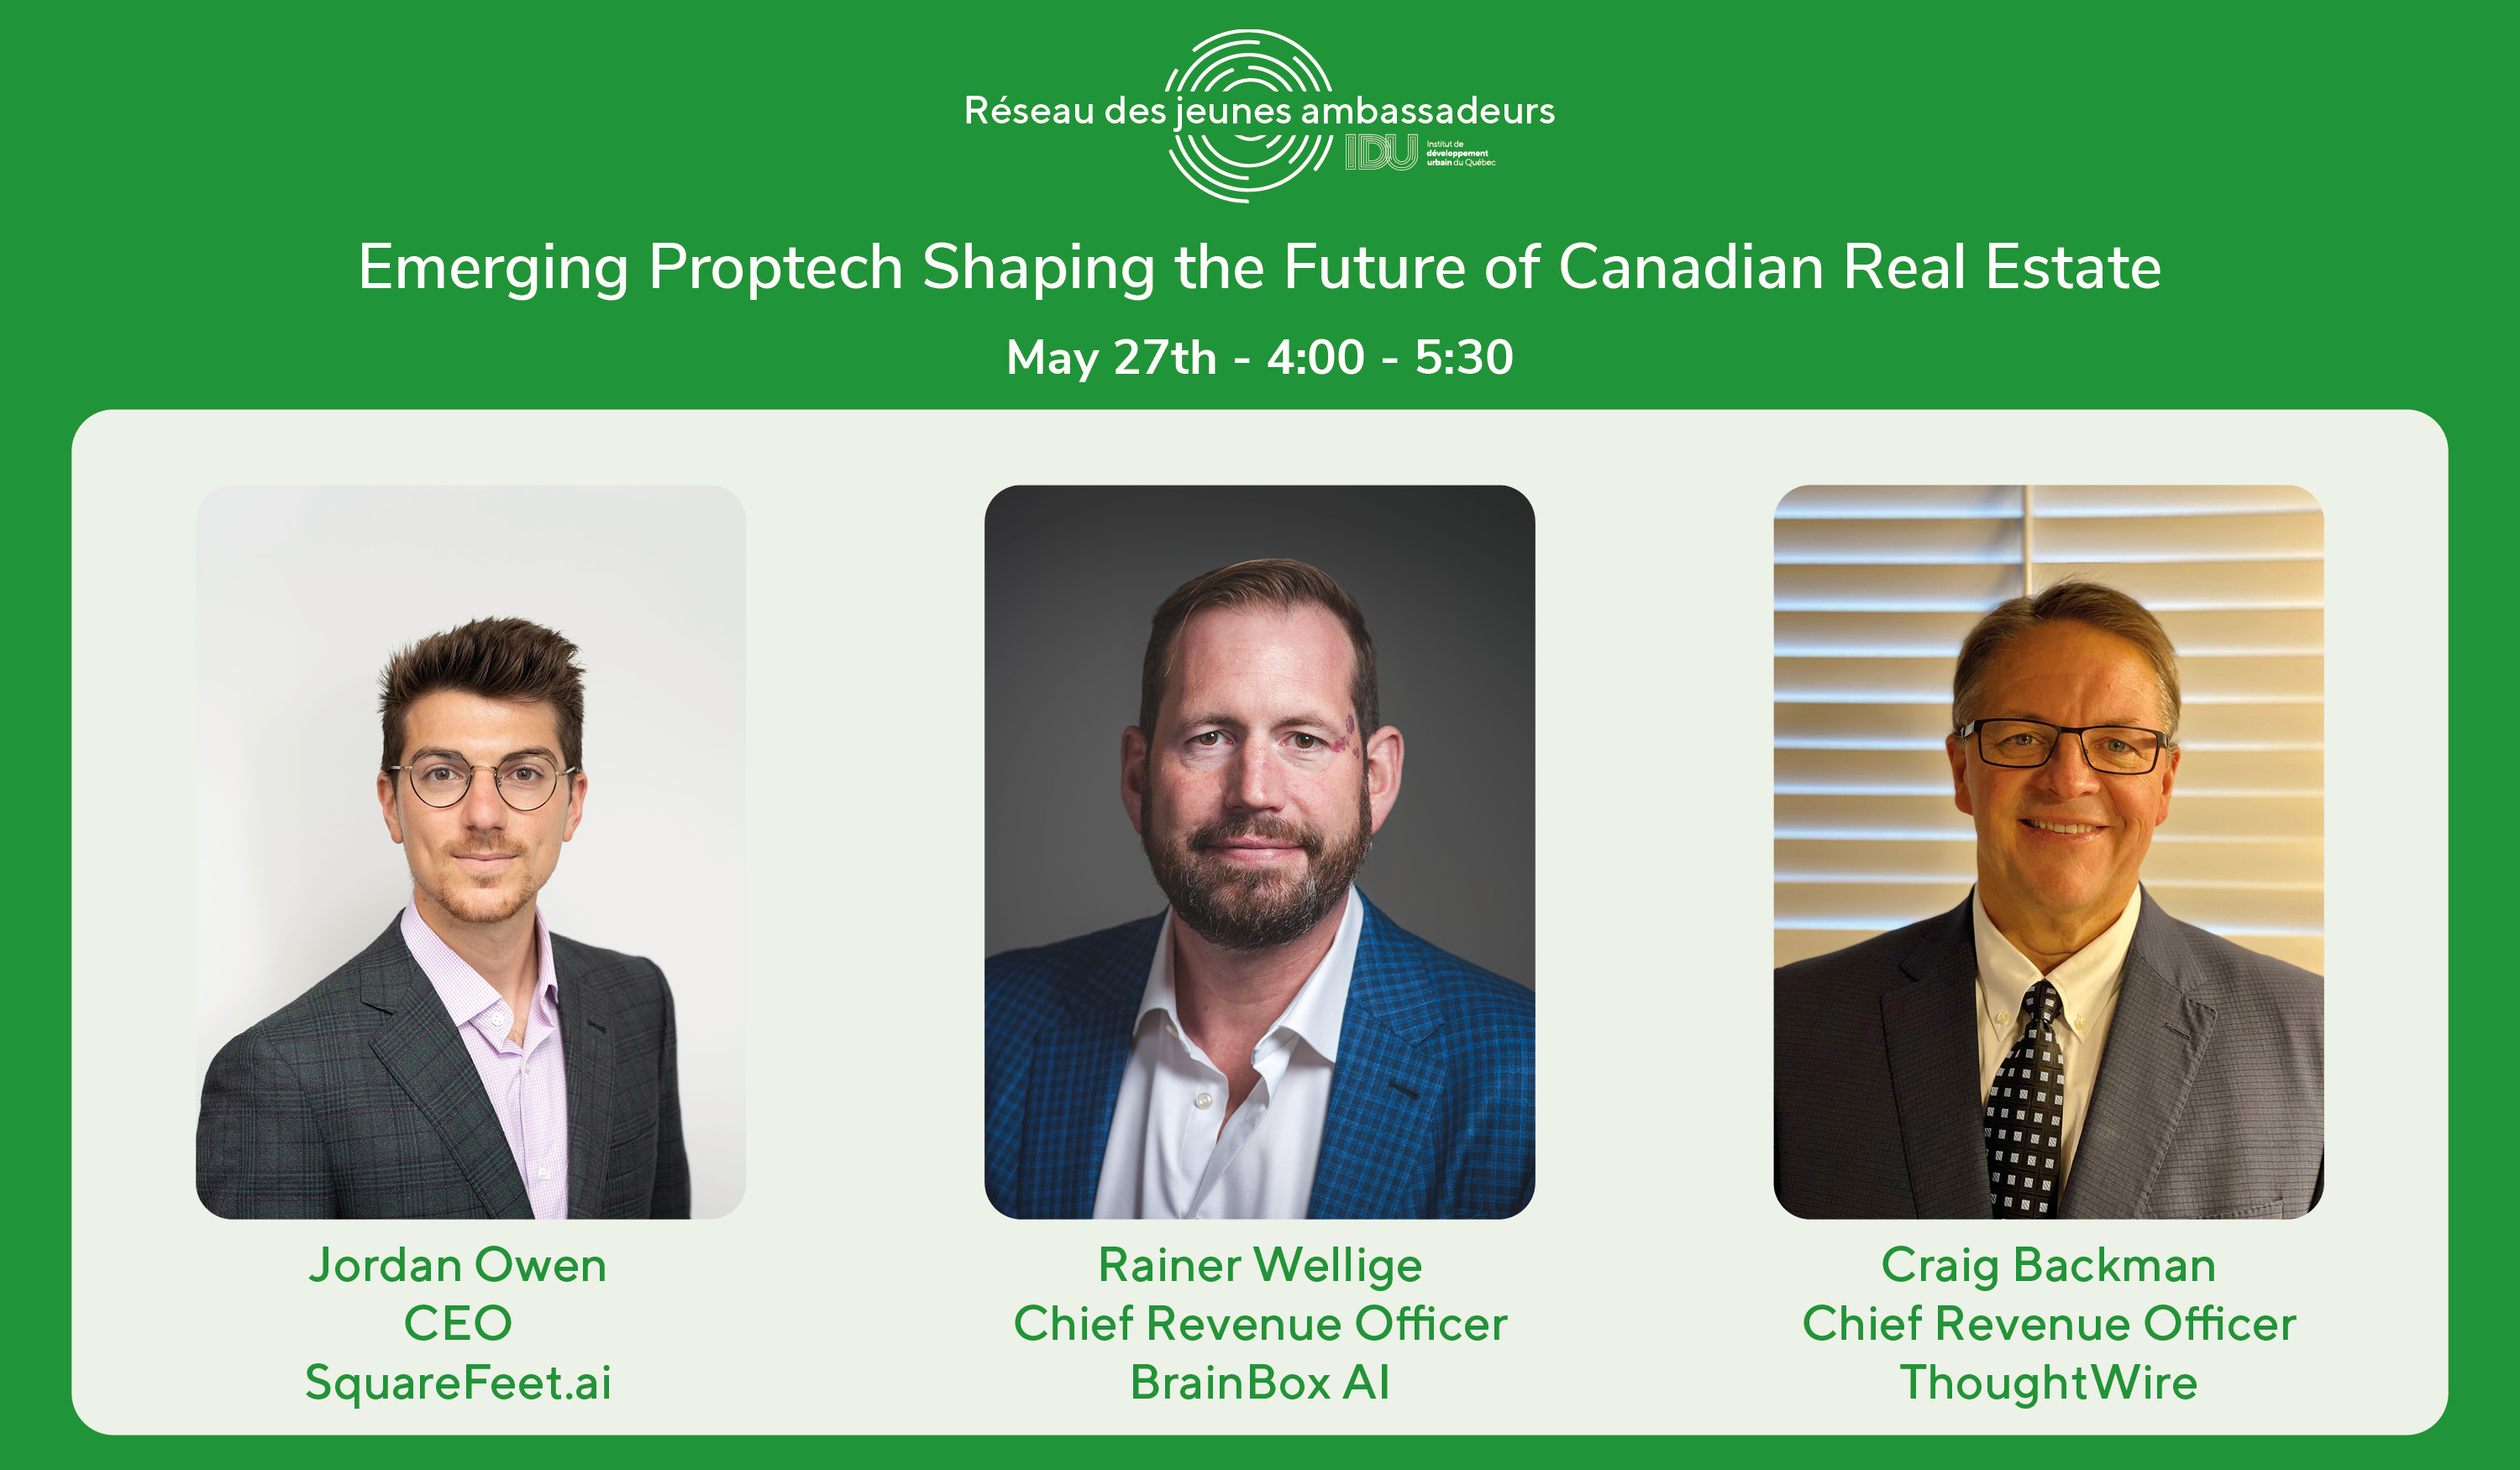 RJA - Emerging Proptech Shaping the Future of Canadian Real Estate